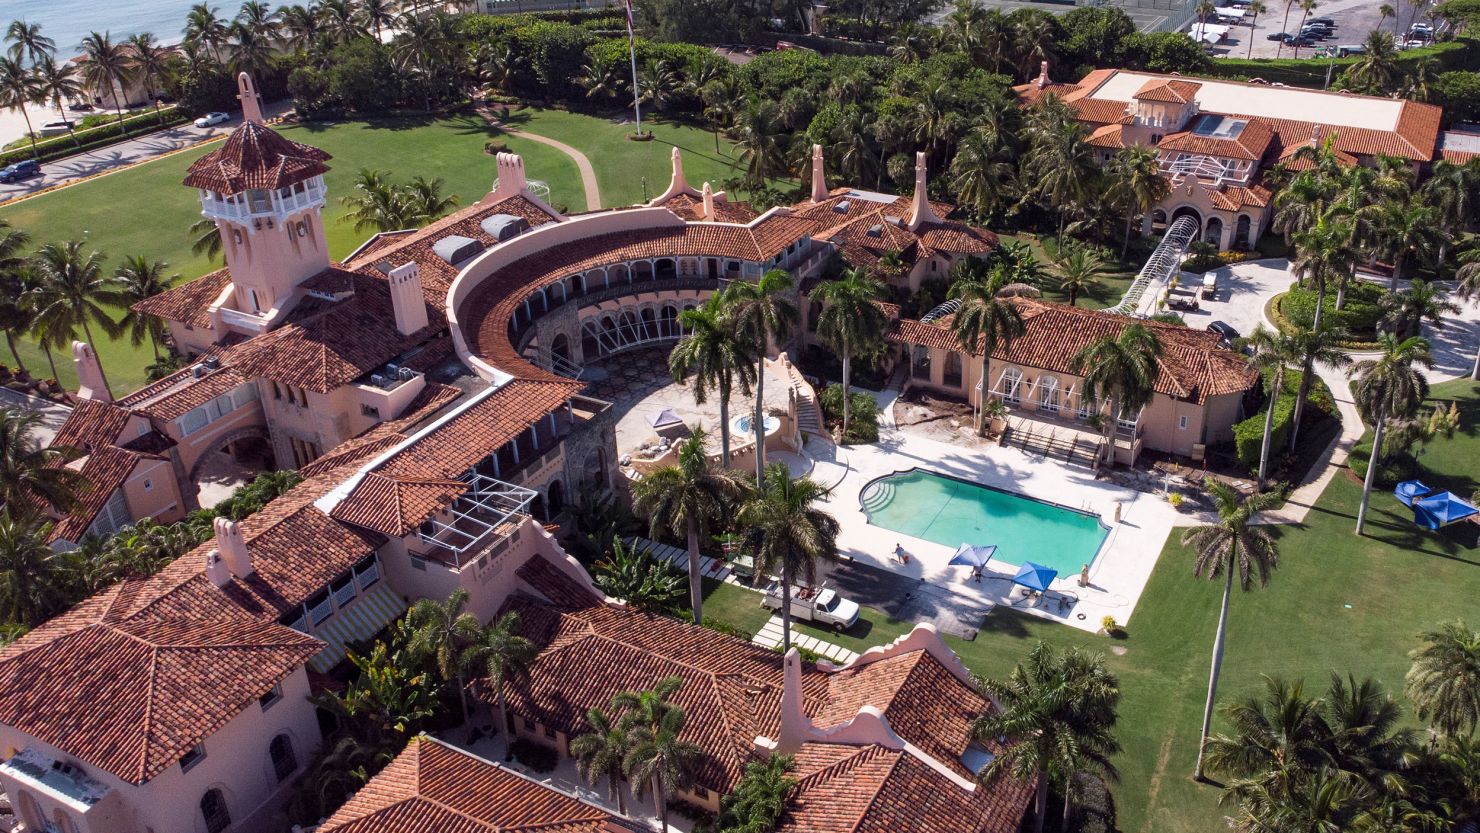 An aerial view of former U.S. President Donald Trump's Mar-a-Lago home after FBI agents raided it, in Palm Beach, Florida, U.S. August 15, 2022.